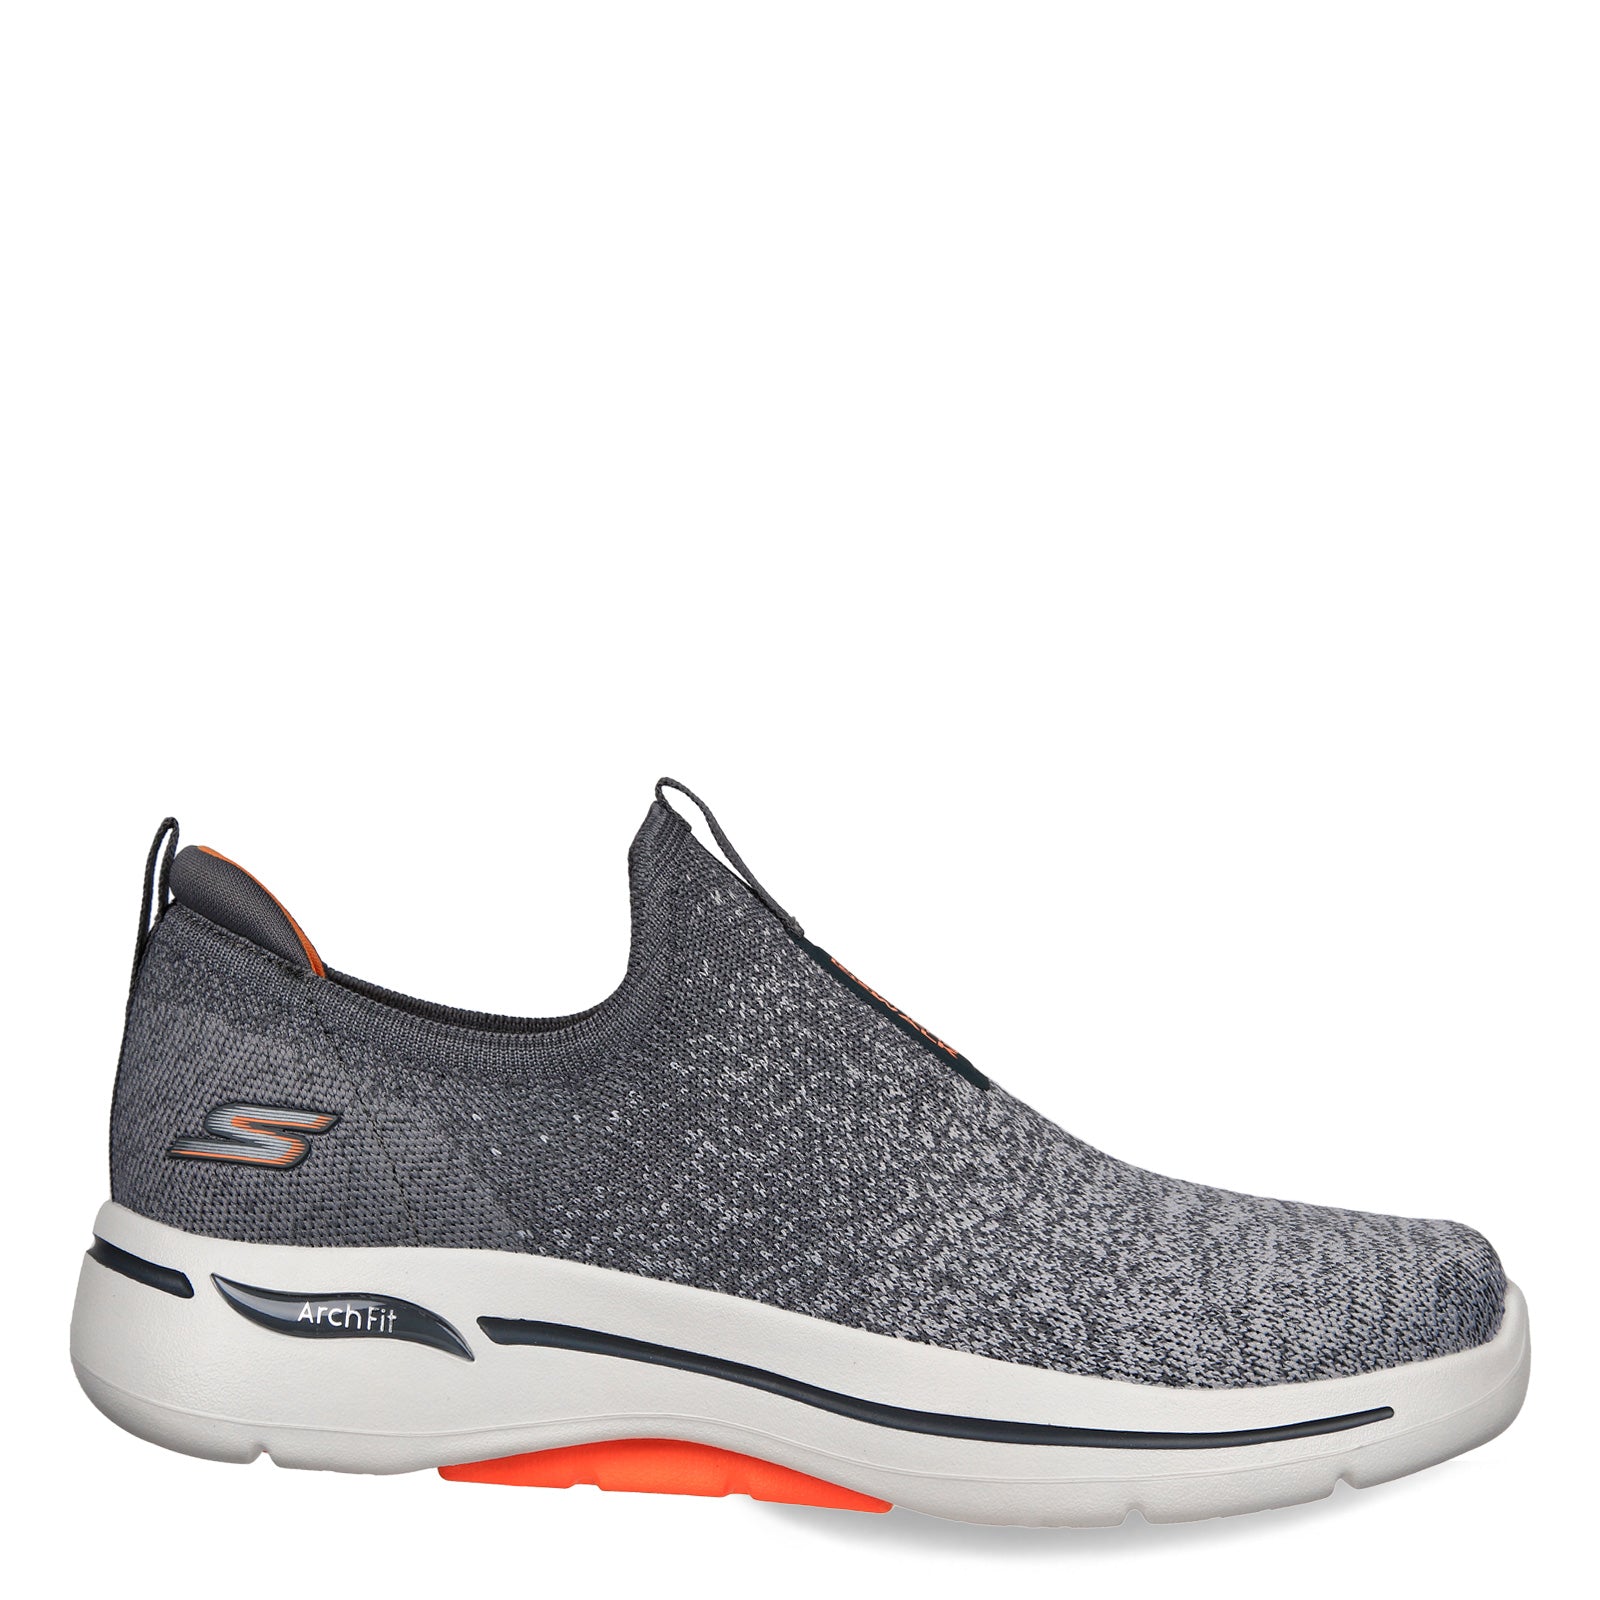 Man's Shoes SKECHERS Performance Go Walk Arch Fit - 216256